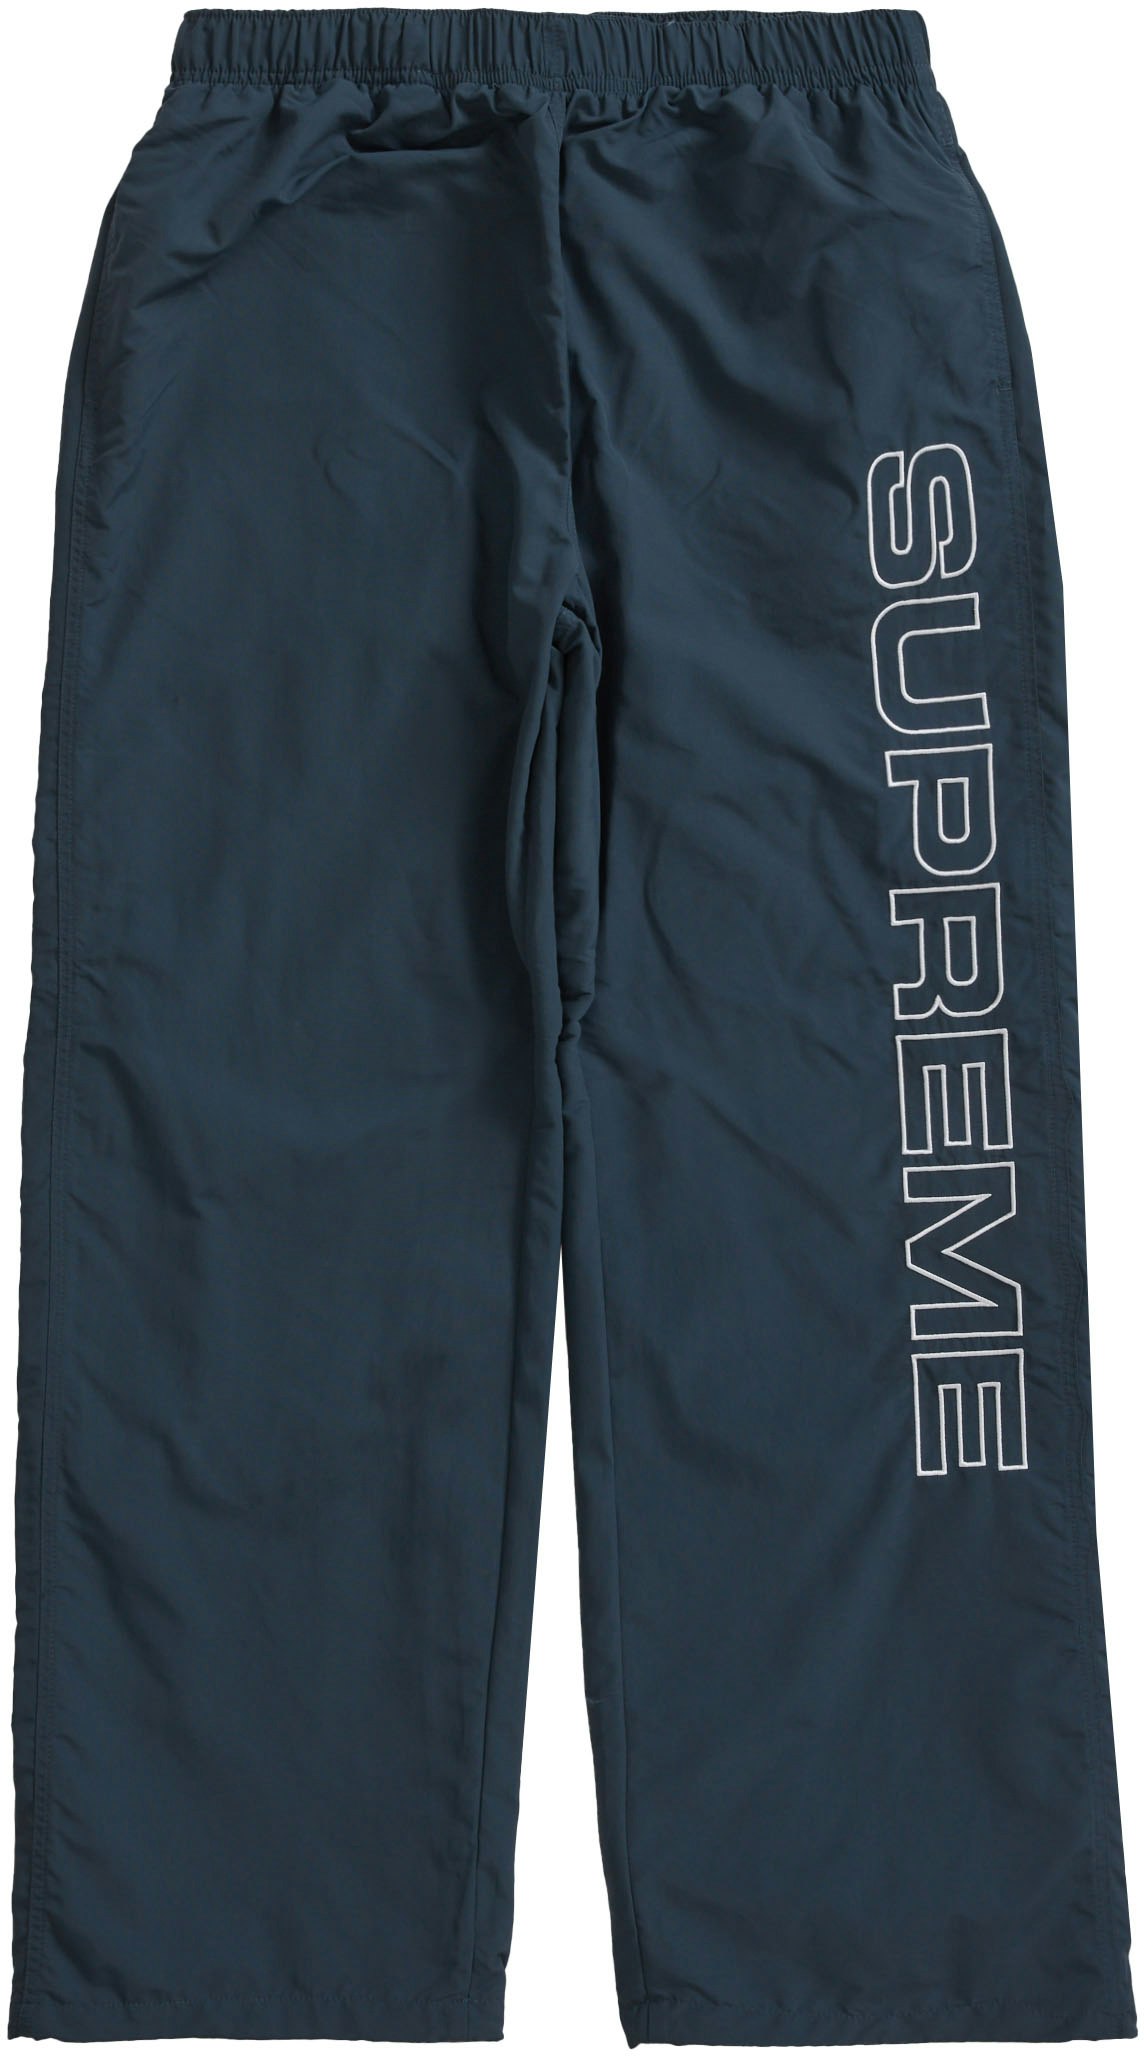 Supreme Spellout Embroidered Track Pant Black